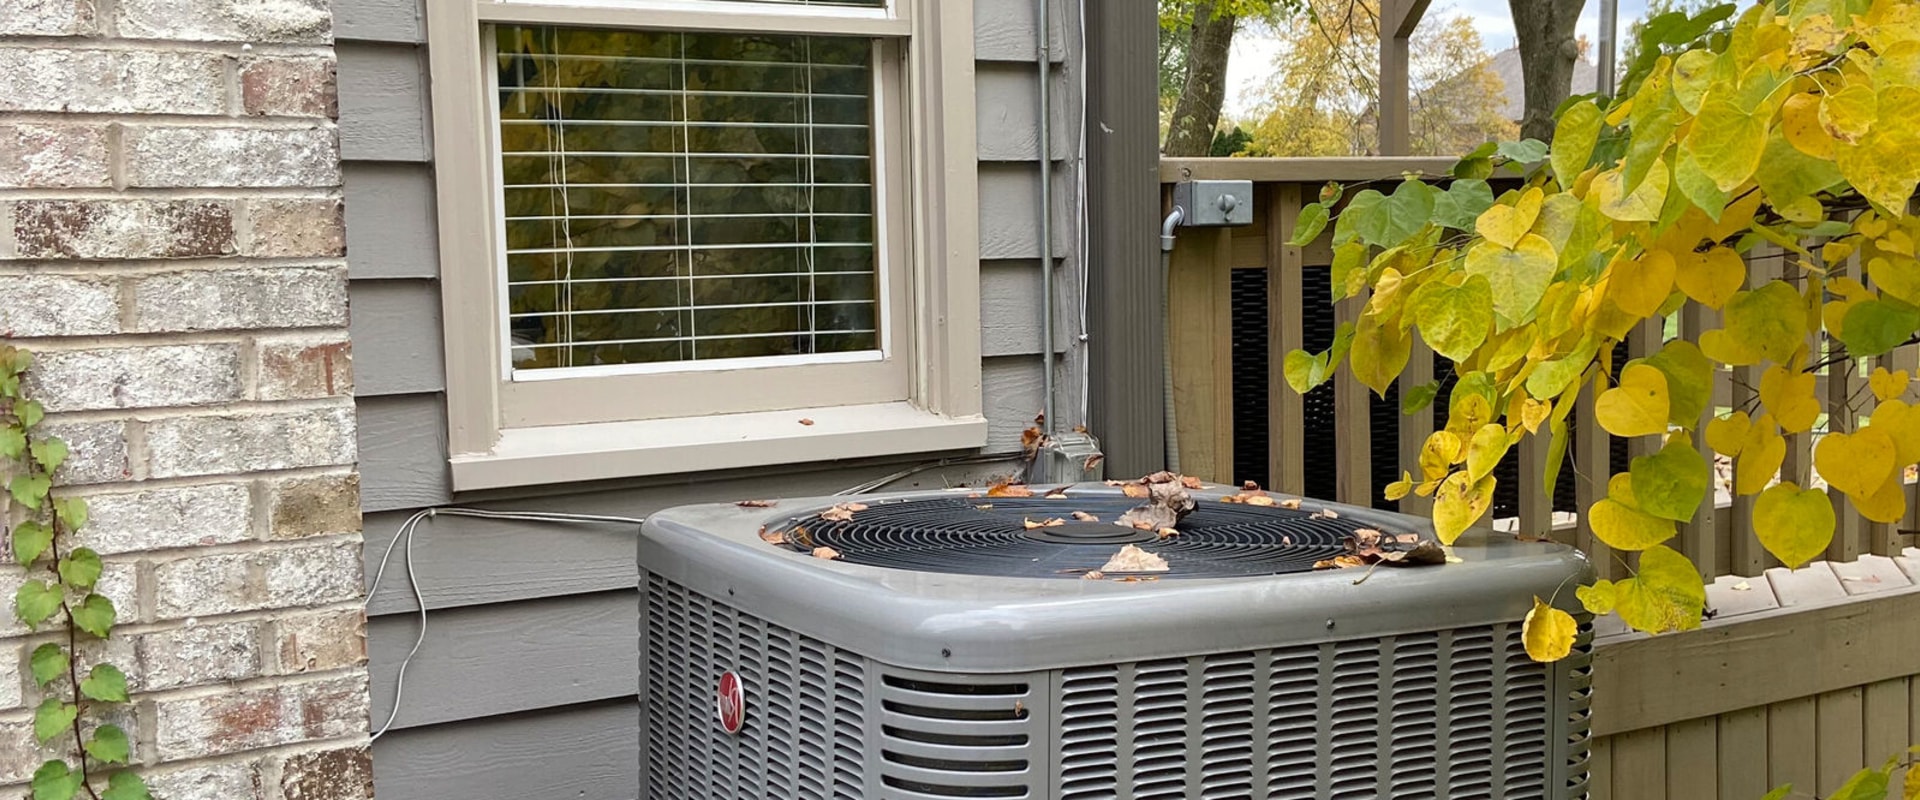 What happens if you don't repair your air conditioning?